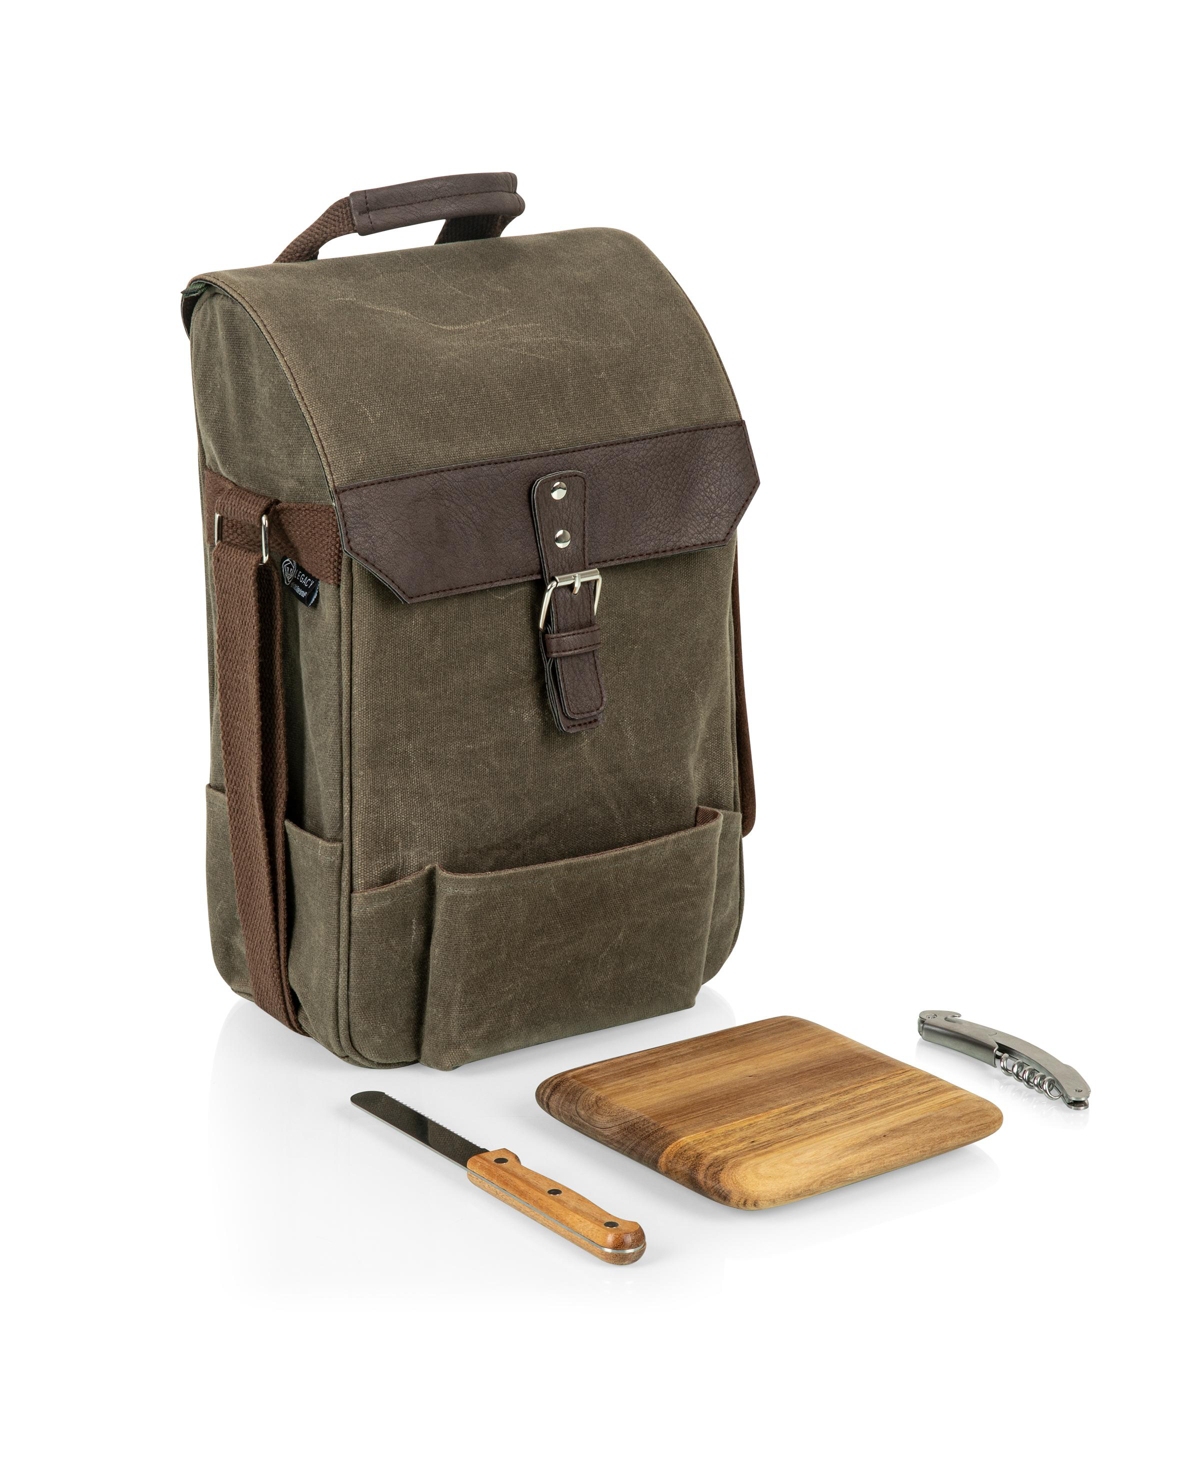 Legacy by Picnic Time 2 Bottle Insulated Wine & Cheese Cooler with Cheese Board, Knife & Corkscrew - Khaki Green